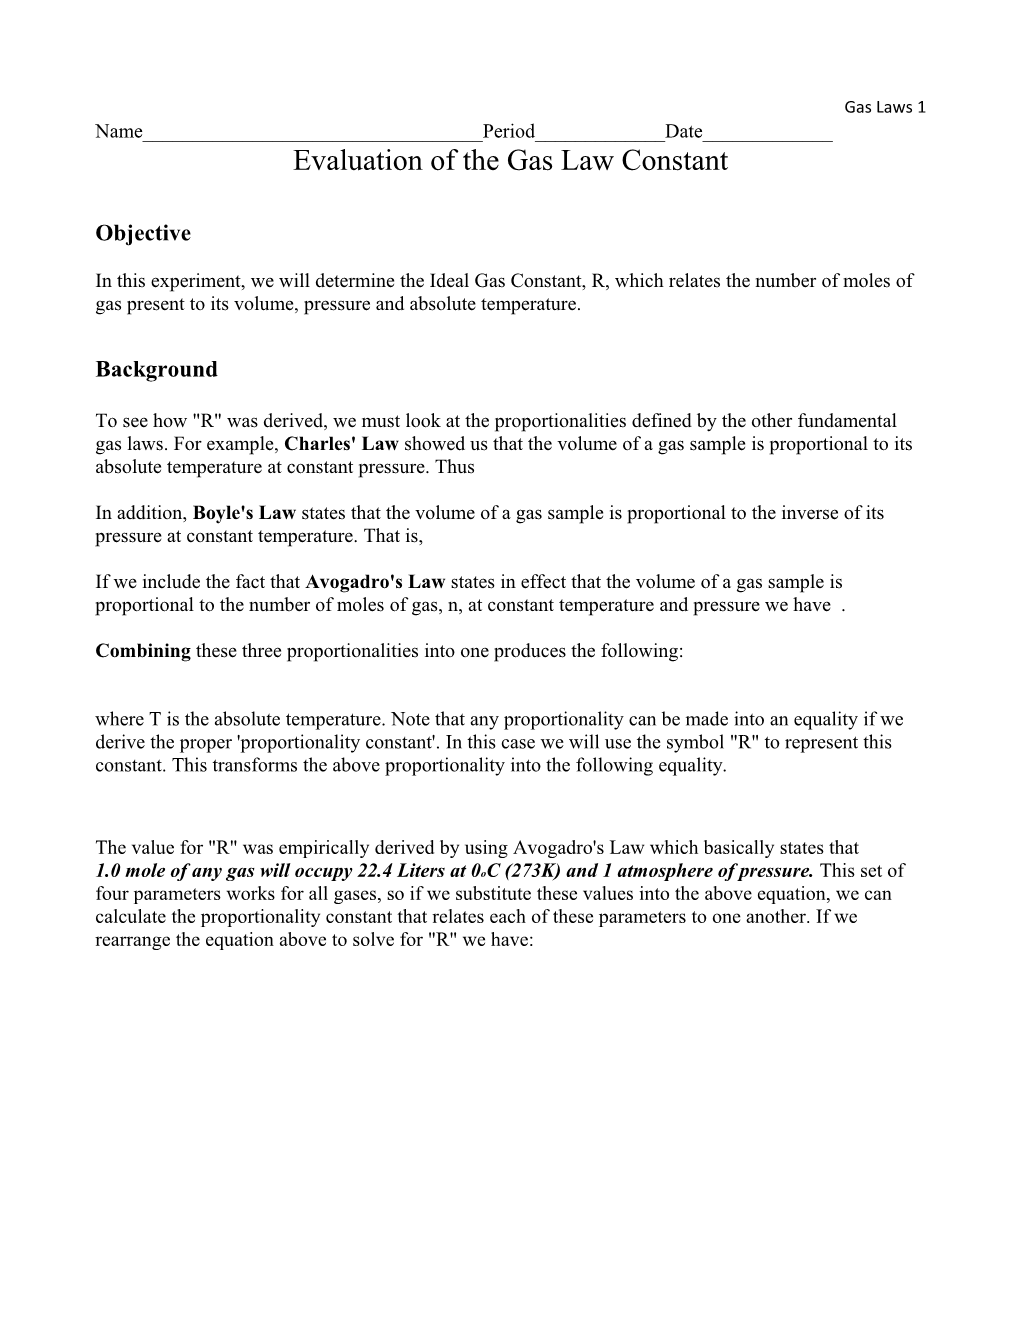 Evaluation of the Gas Law Constant